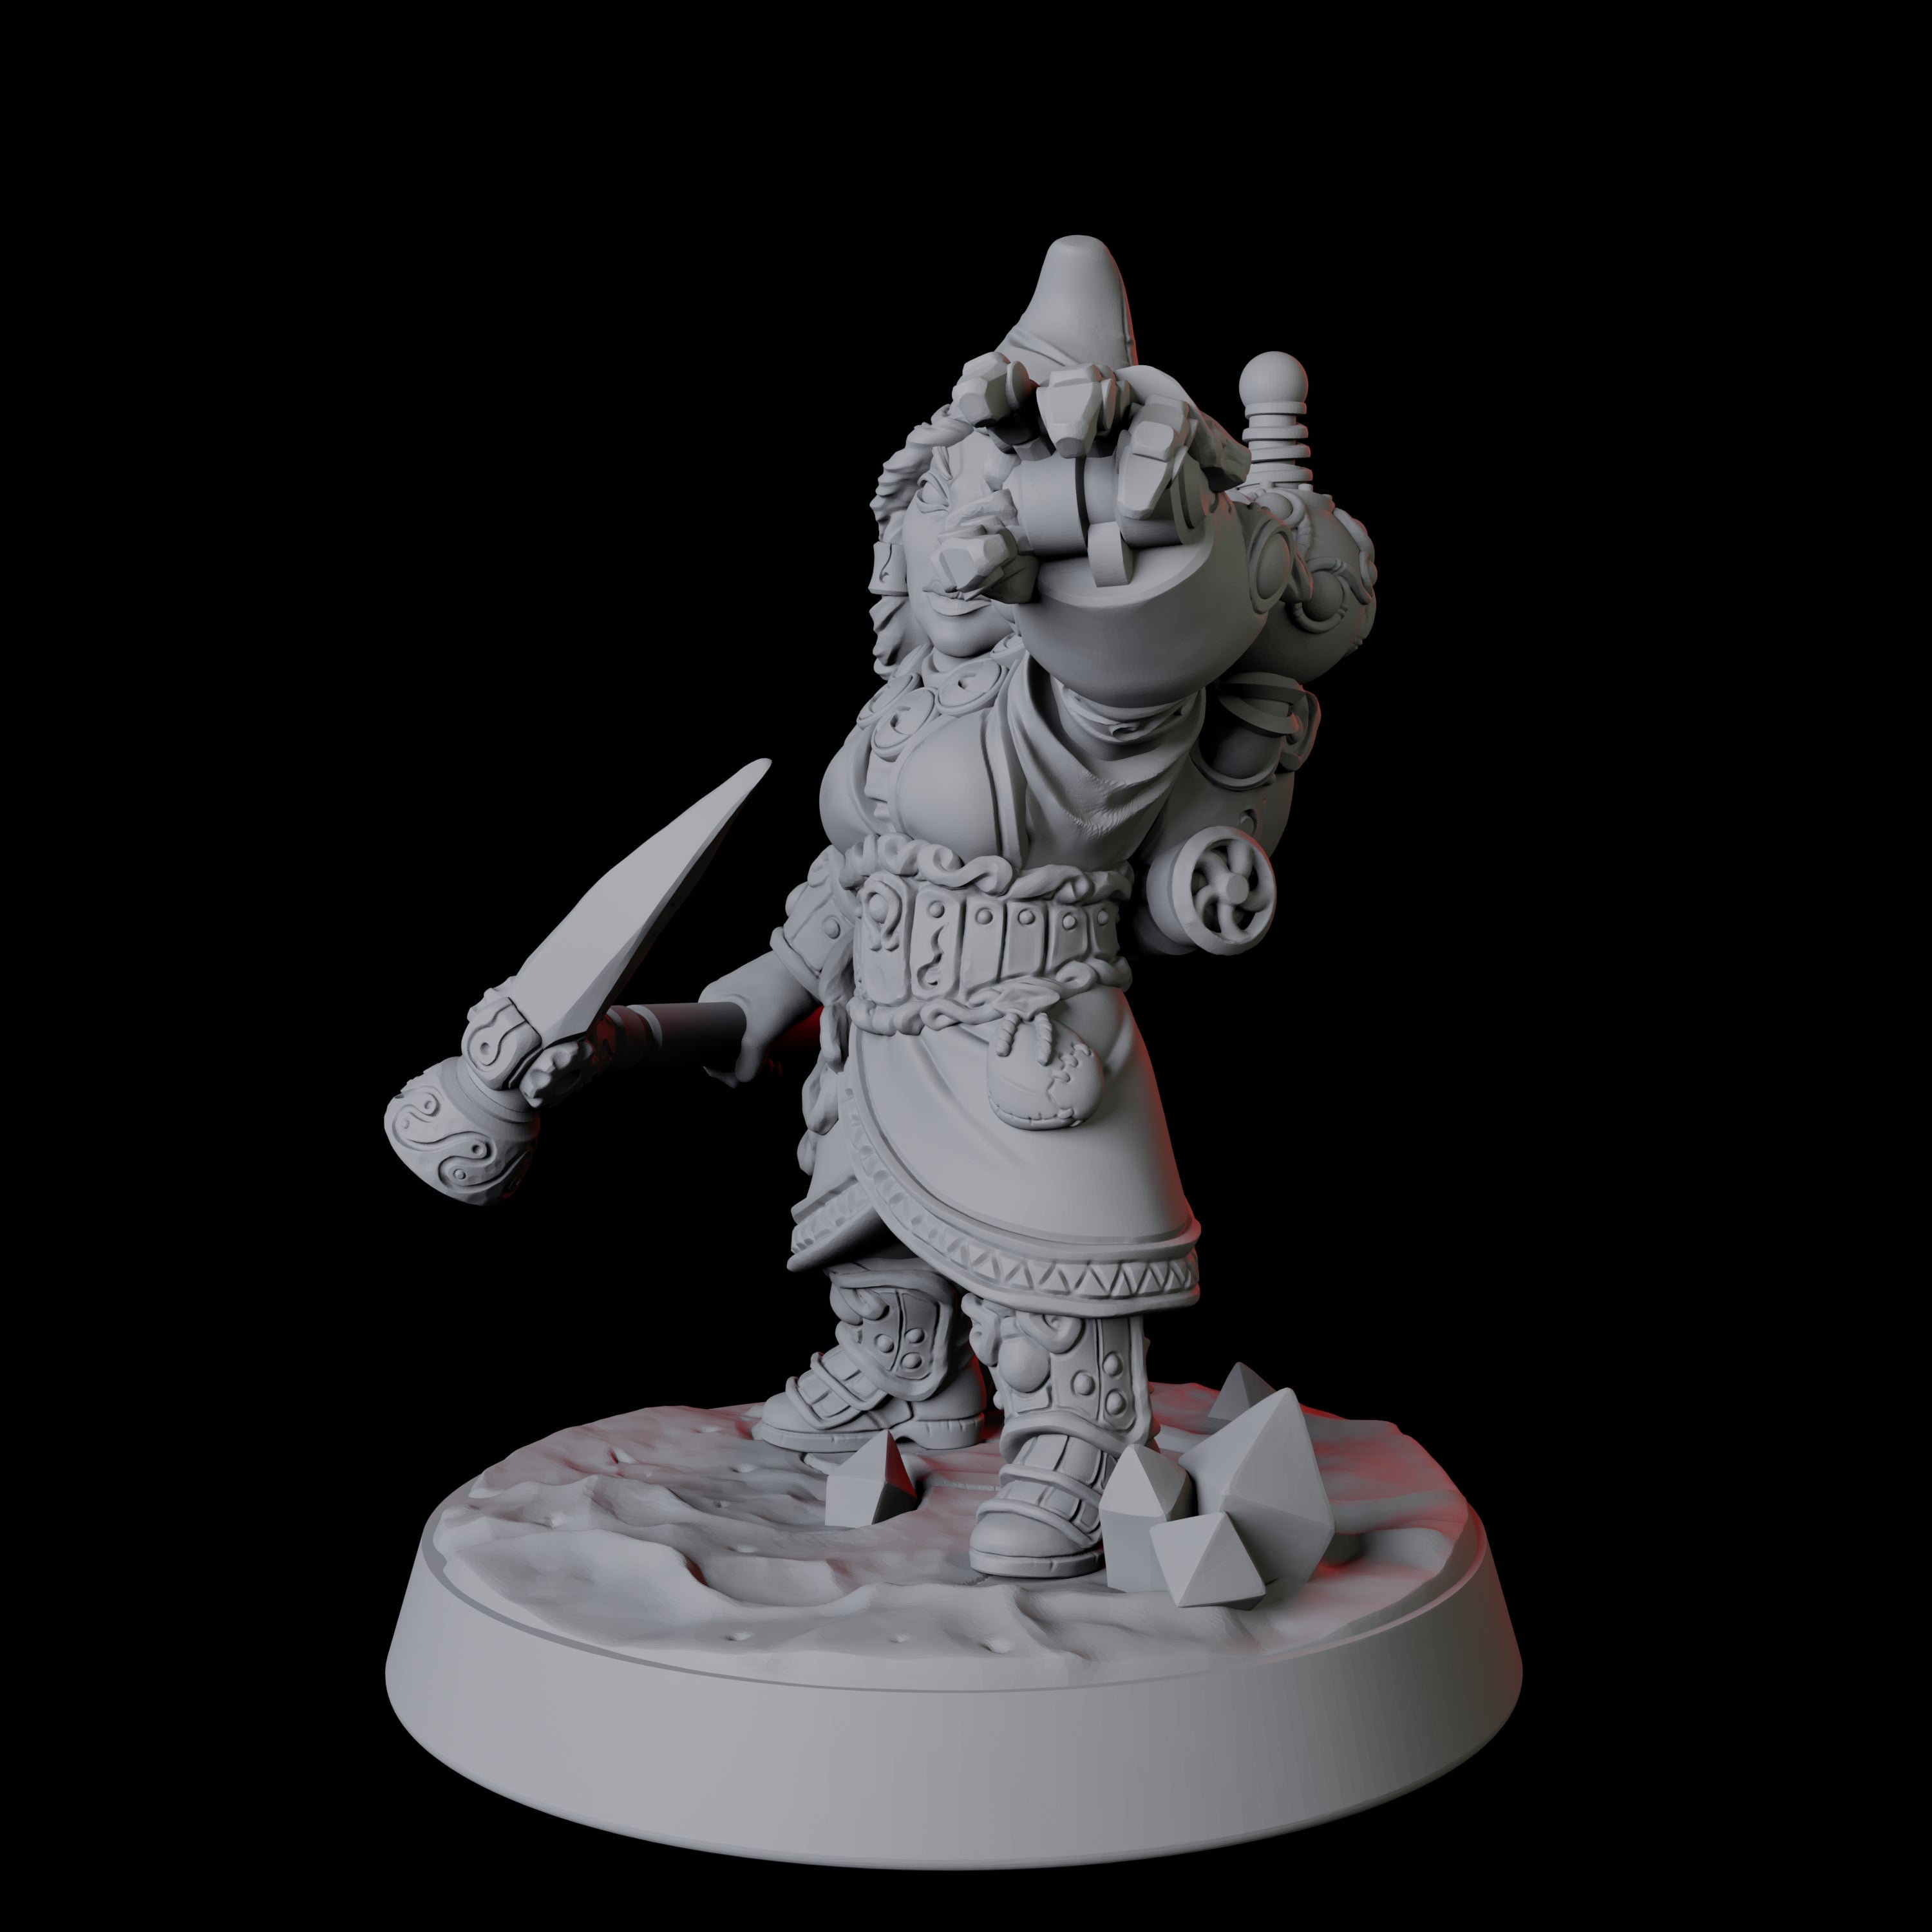 Deep Gnome Artificer D Miniature for Dungeons and Dragons, Pathfinder or other TTRPGs